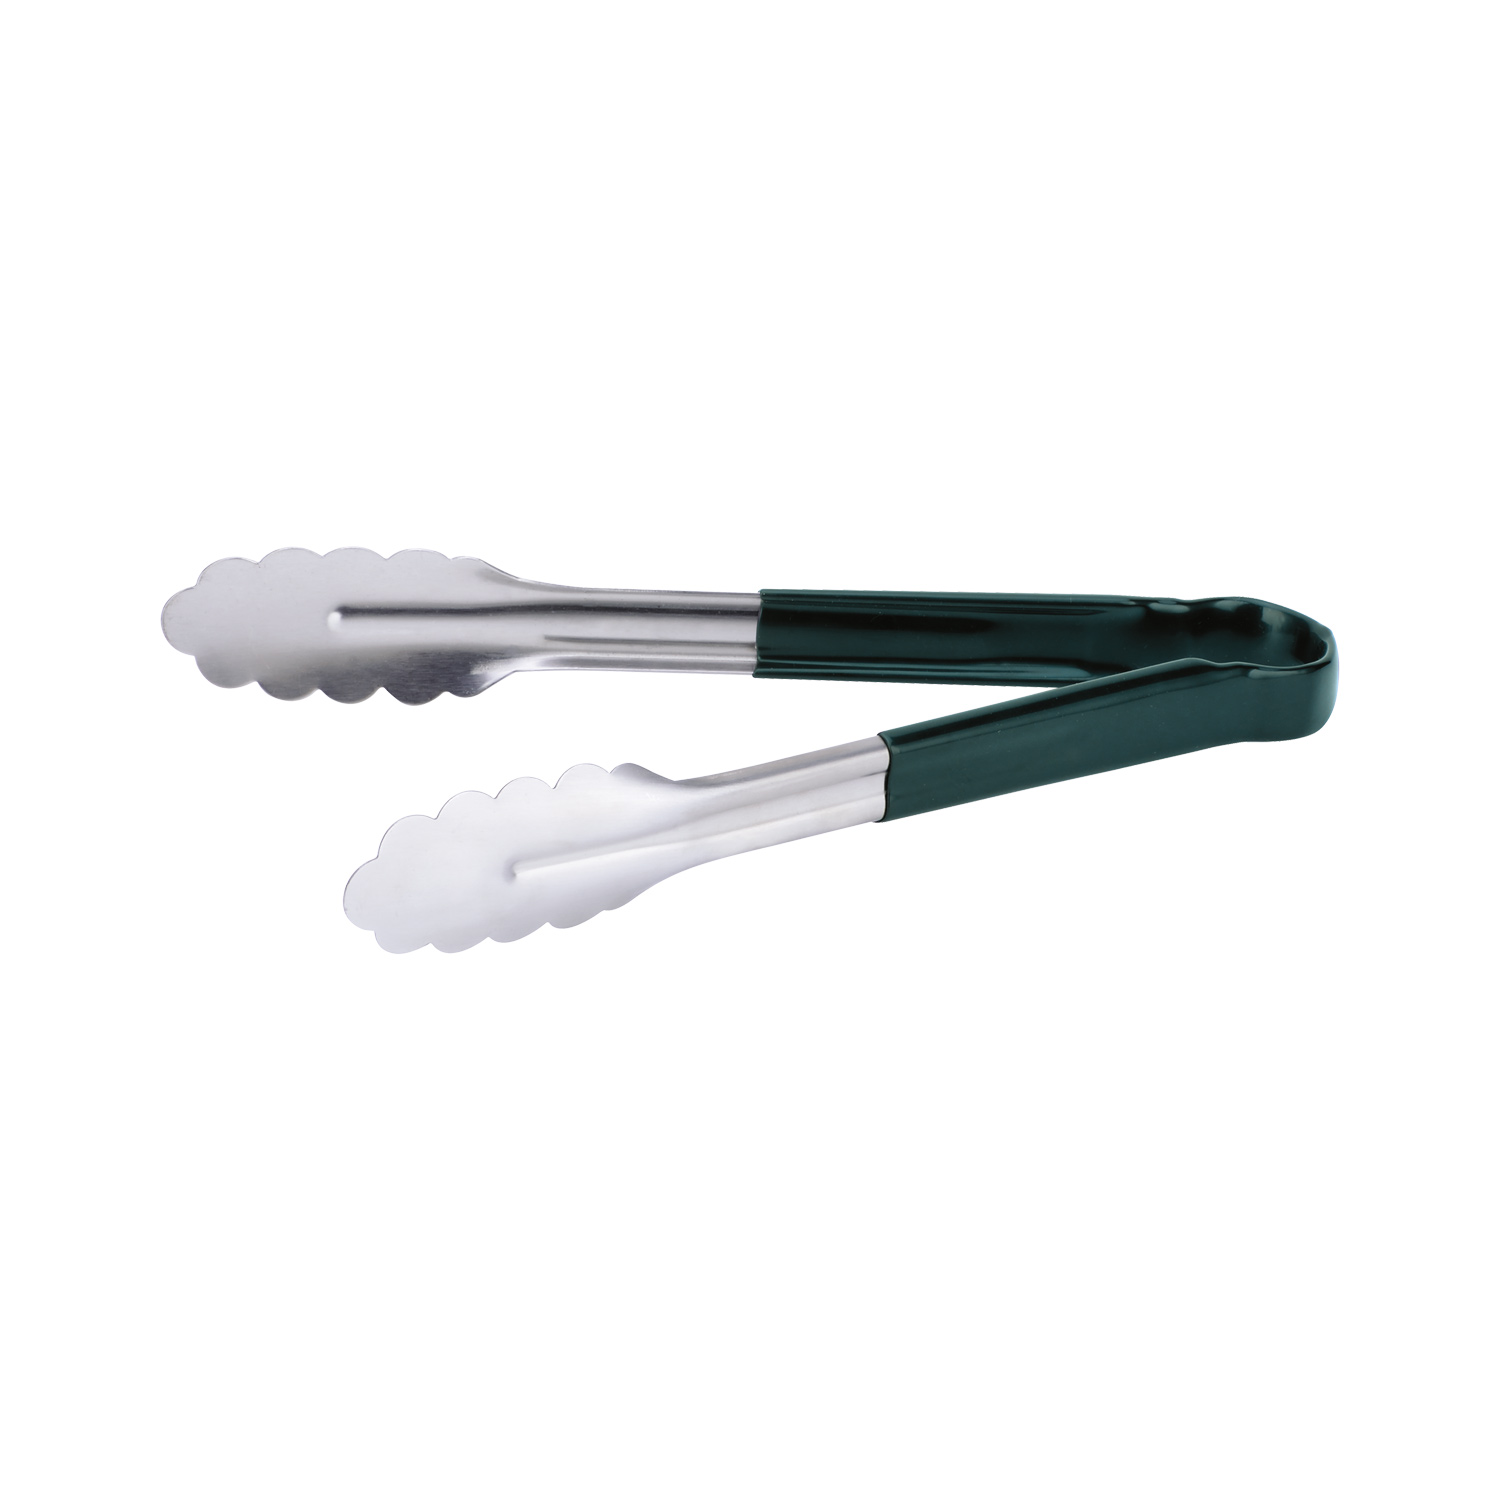 CAC China STCH-10GN Stainless Steel Tongs with Green Handle 10"